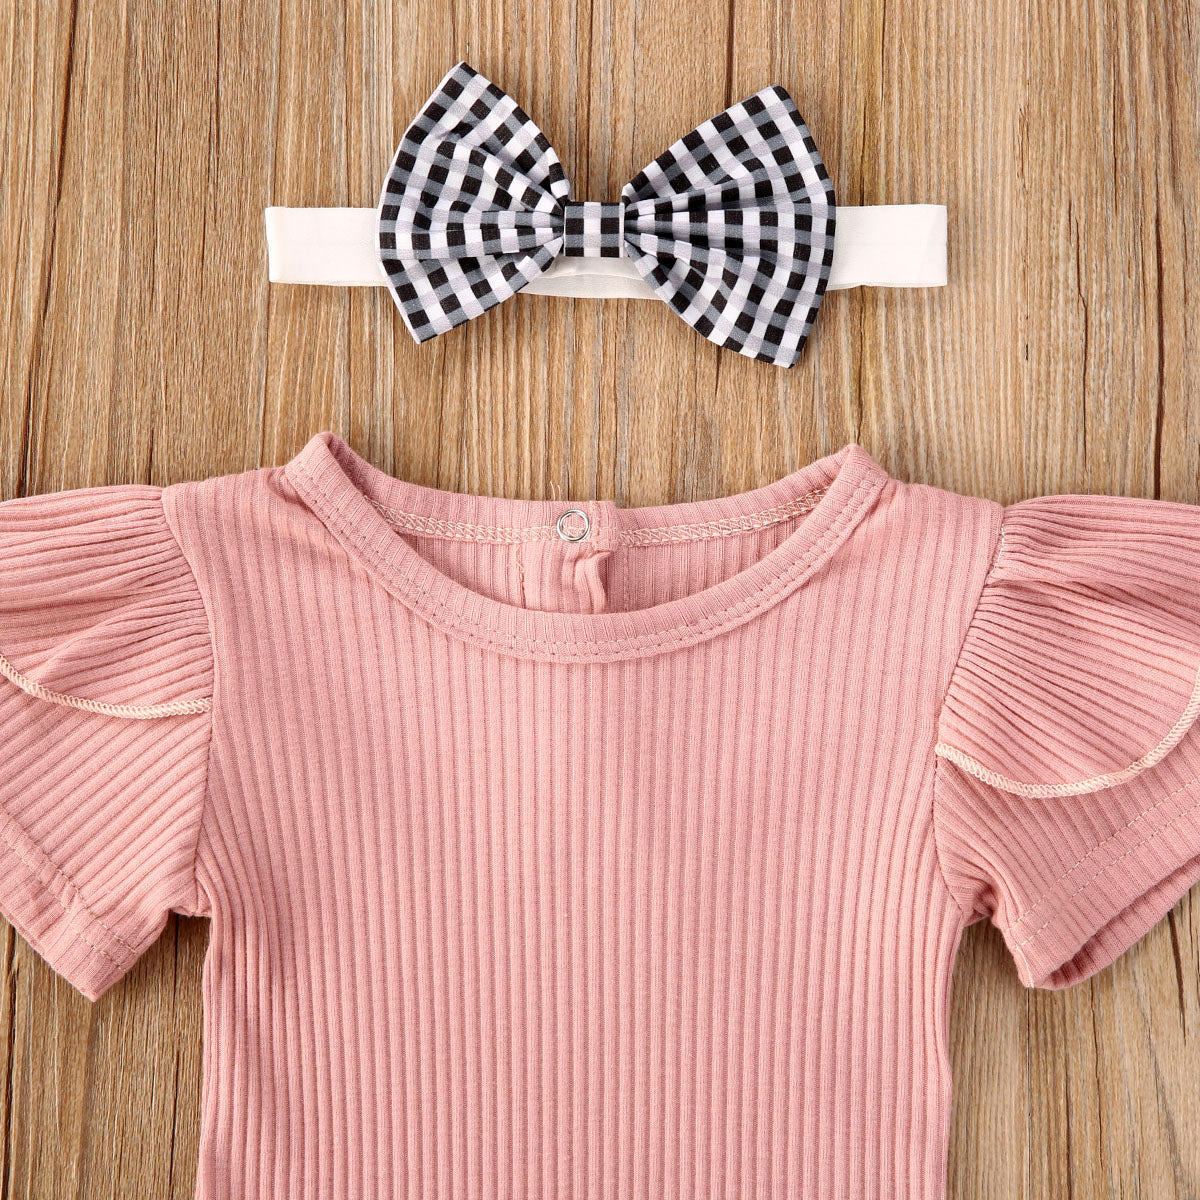 Stripes and bows